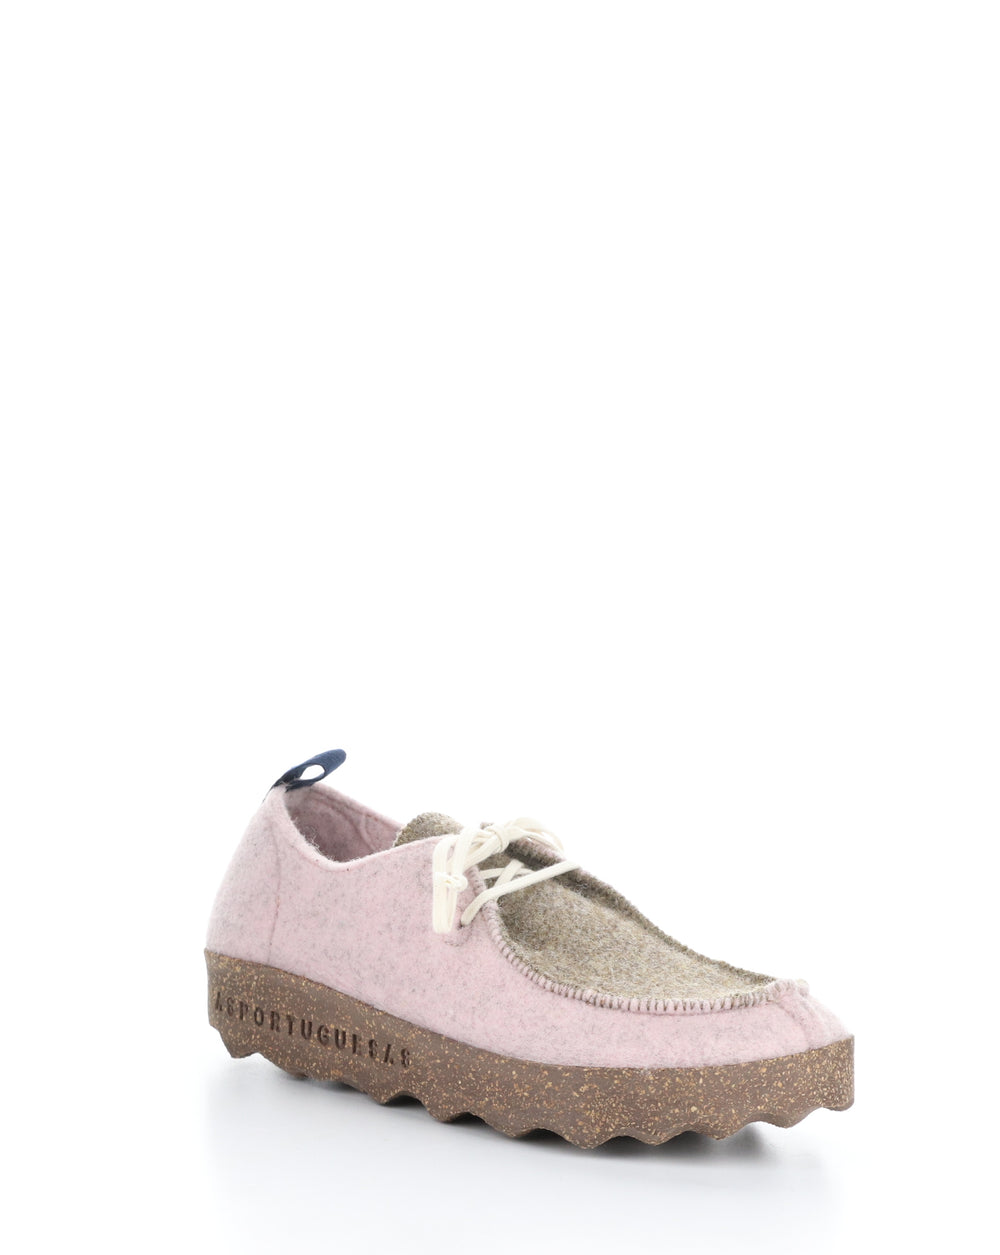 CHAT063ASP Pink Lace-up Shoes